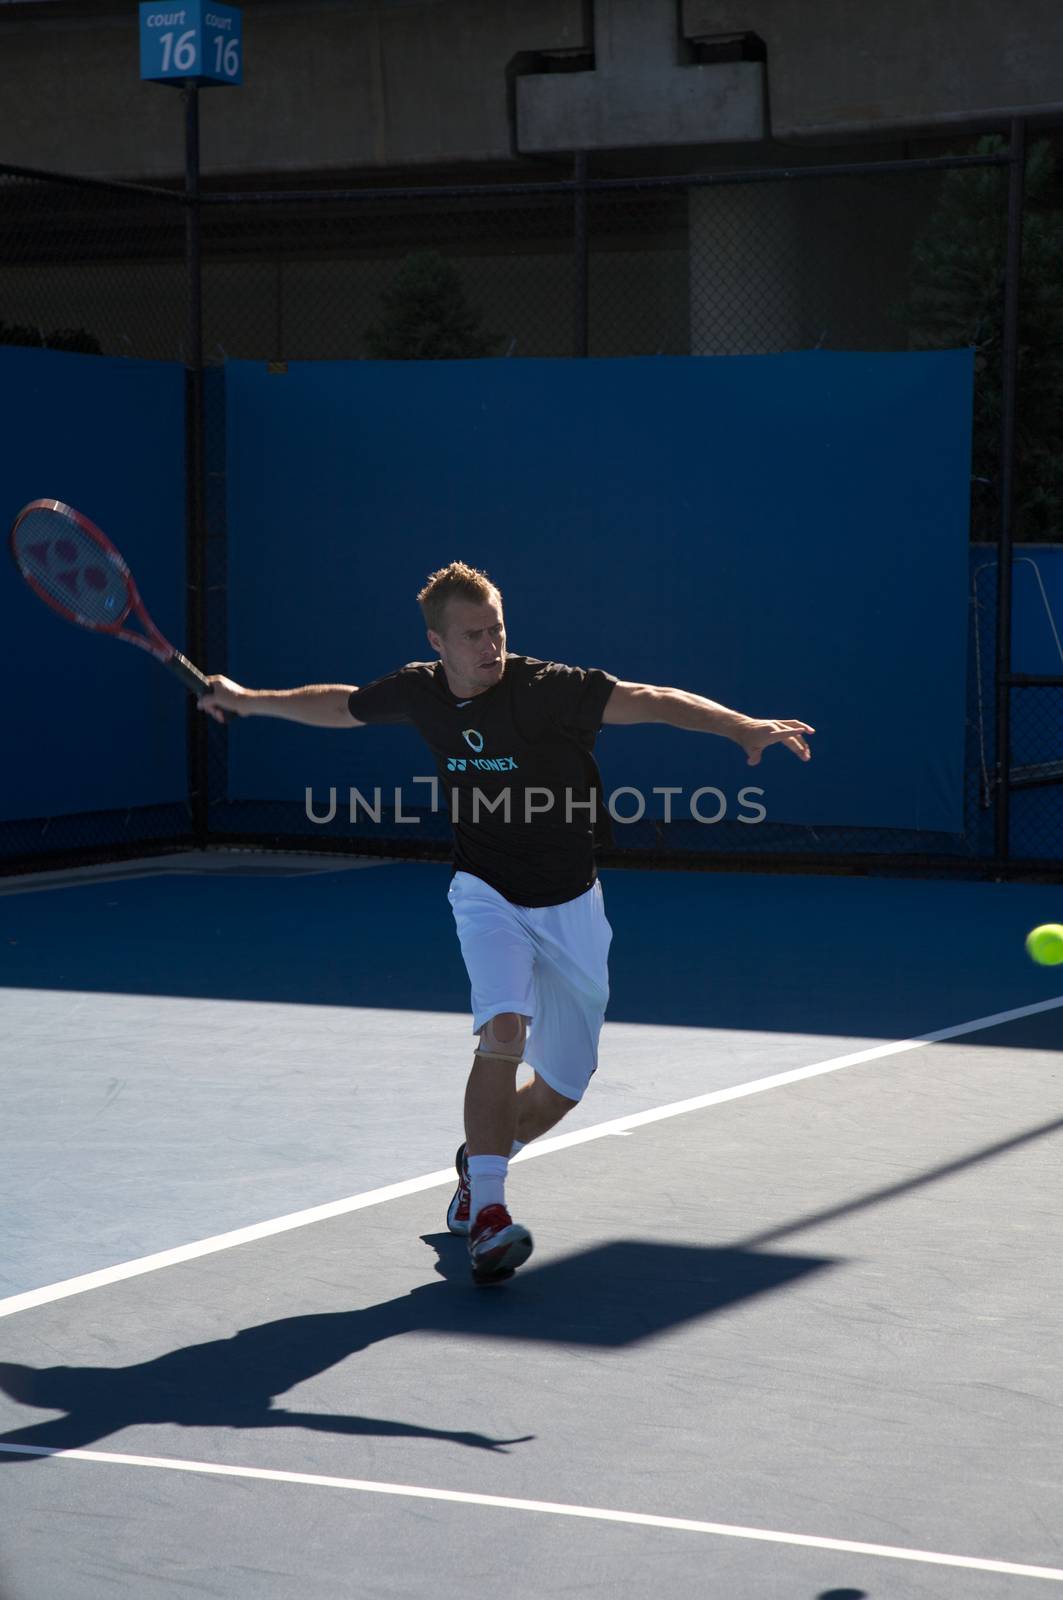 Australia's Lleyton Hewitt During his Practicing Session at Australia Open Tournament in Melbourne